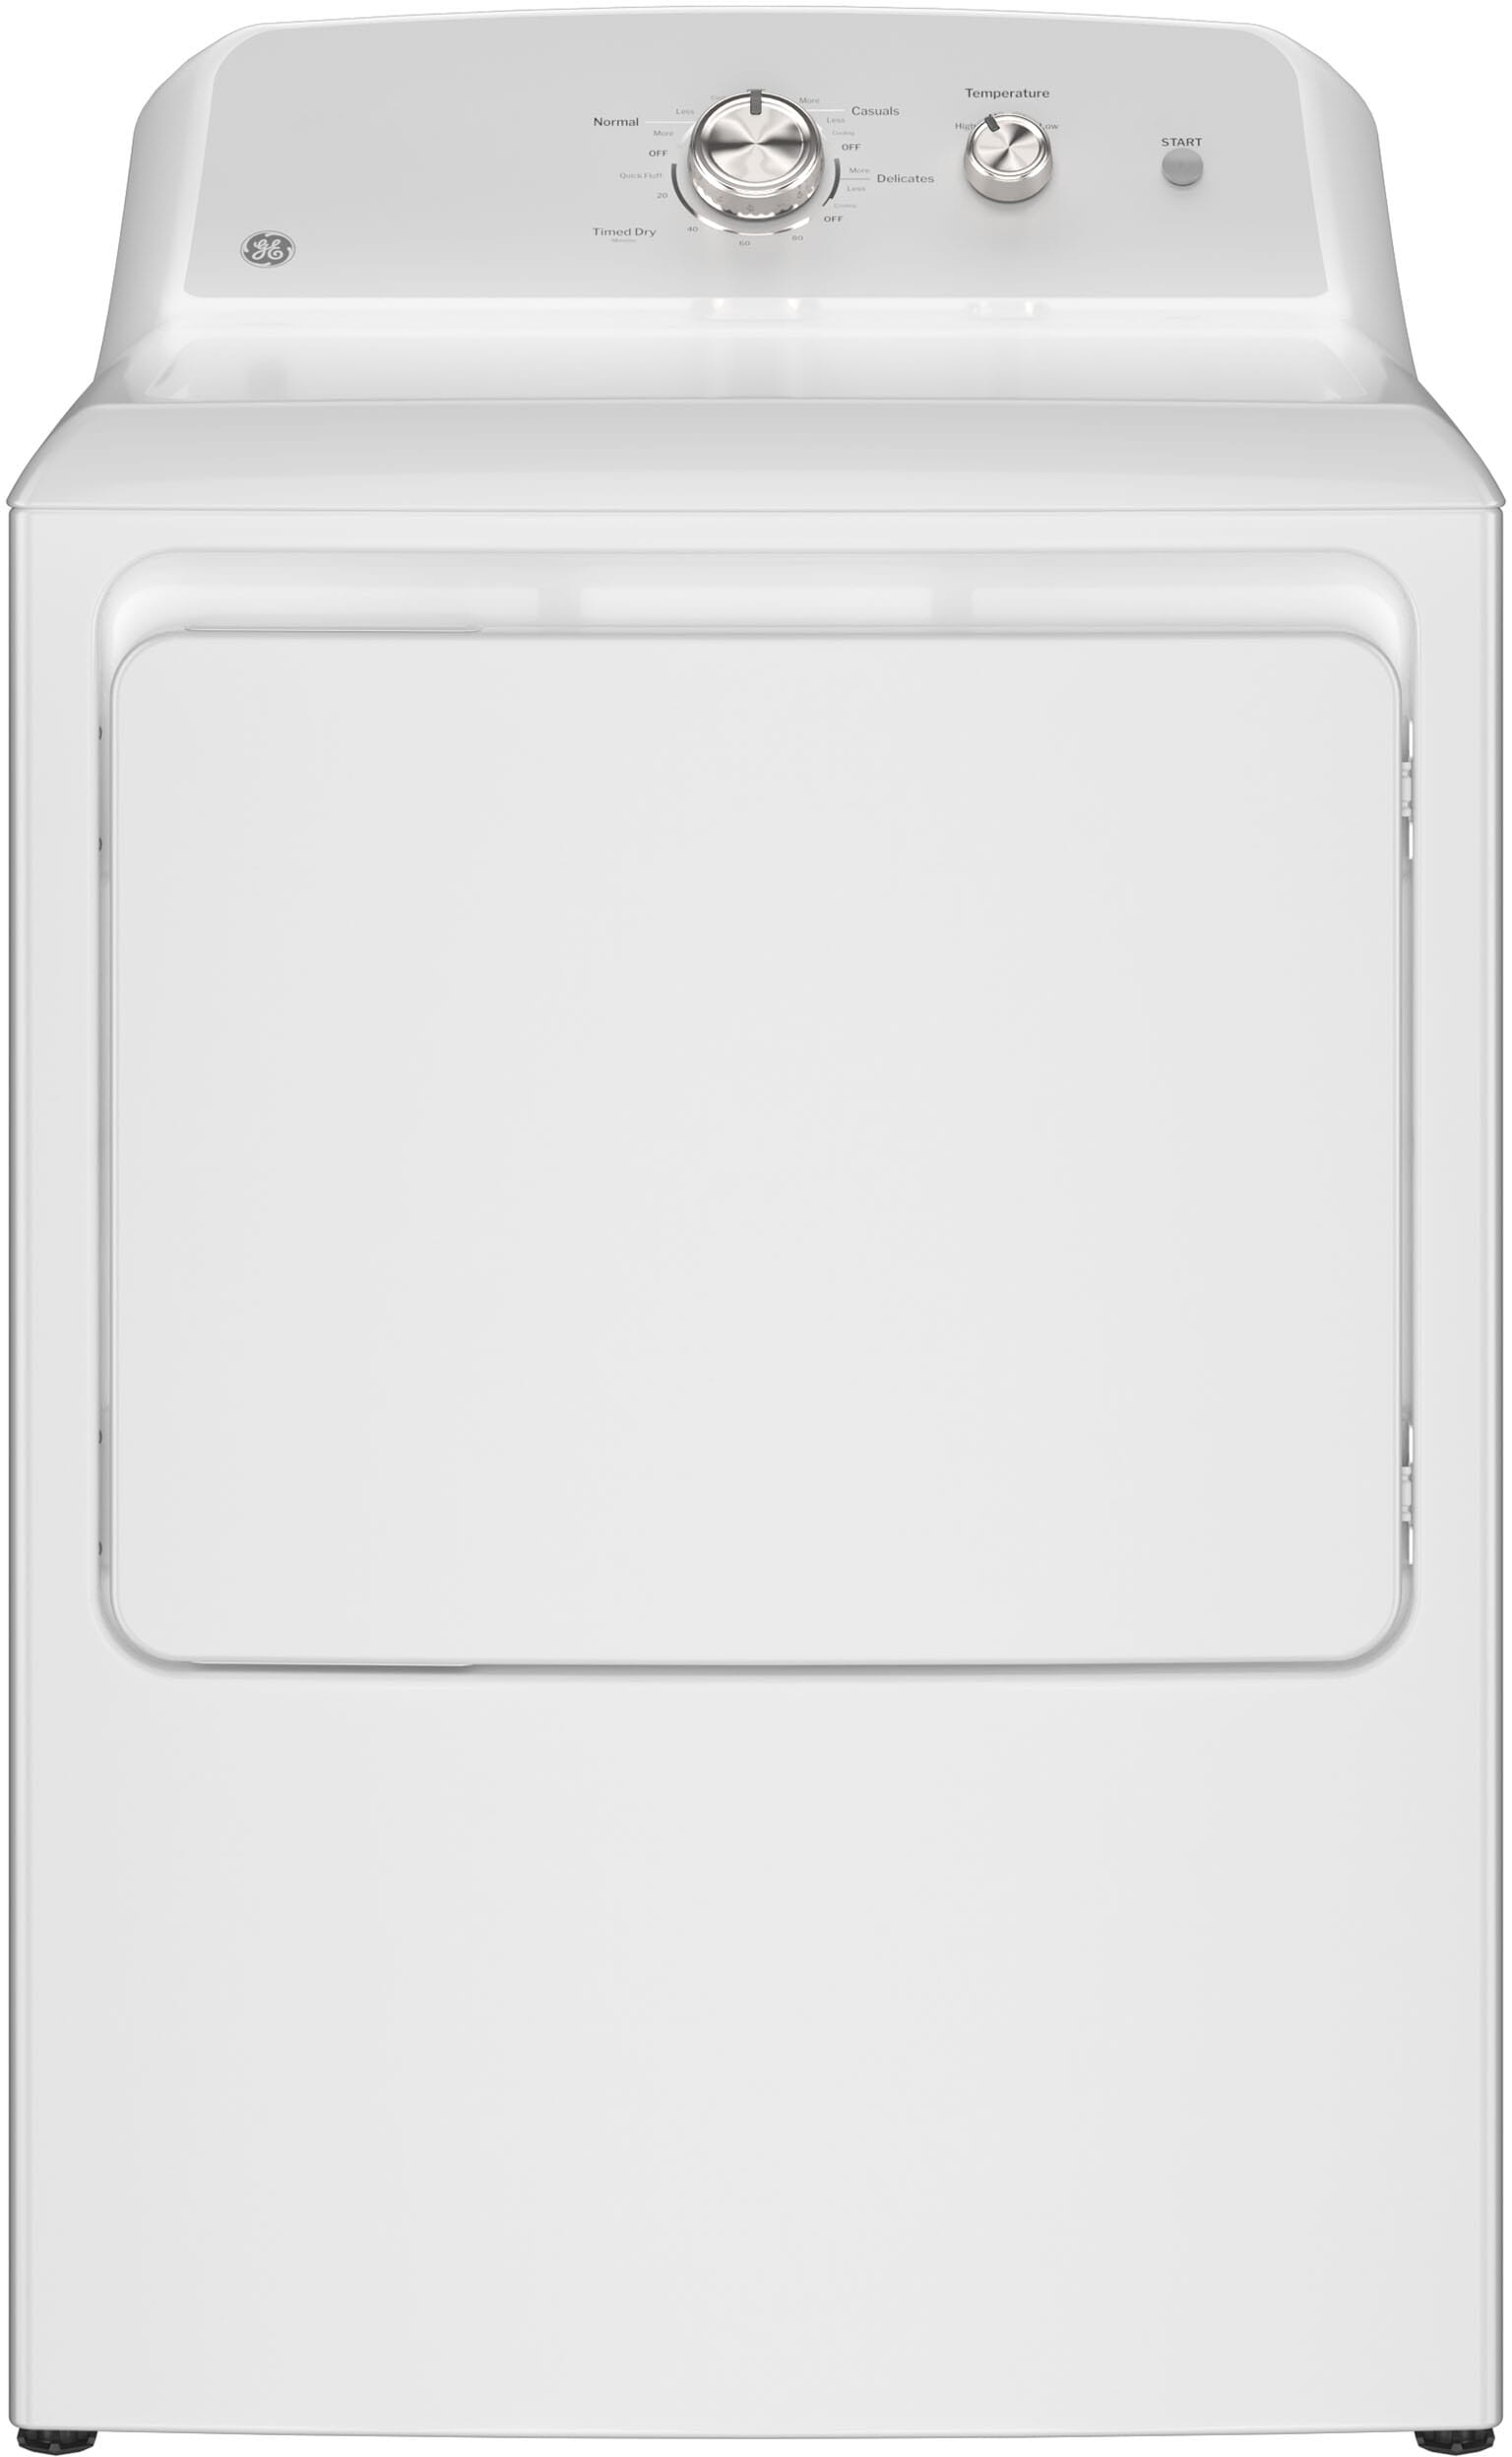 27 Inch Top Load Electric Dryer